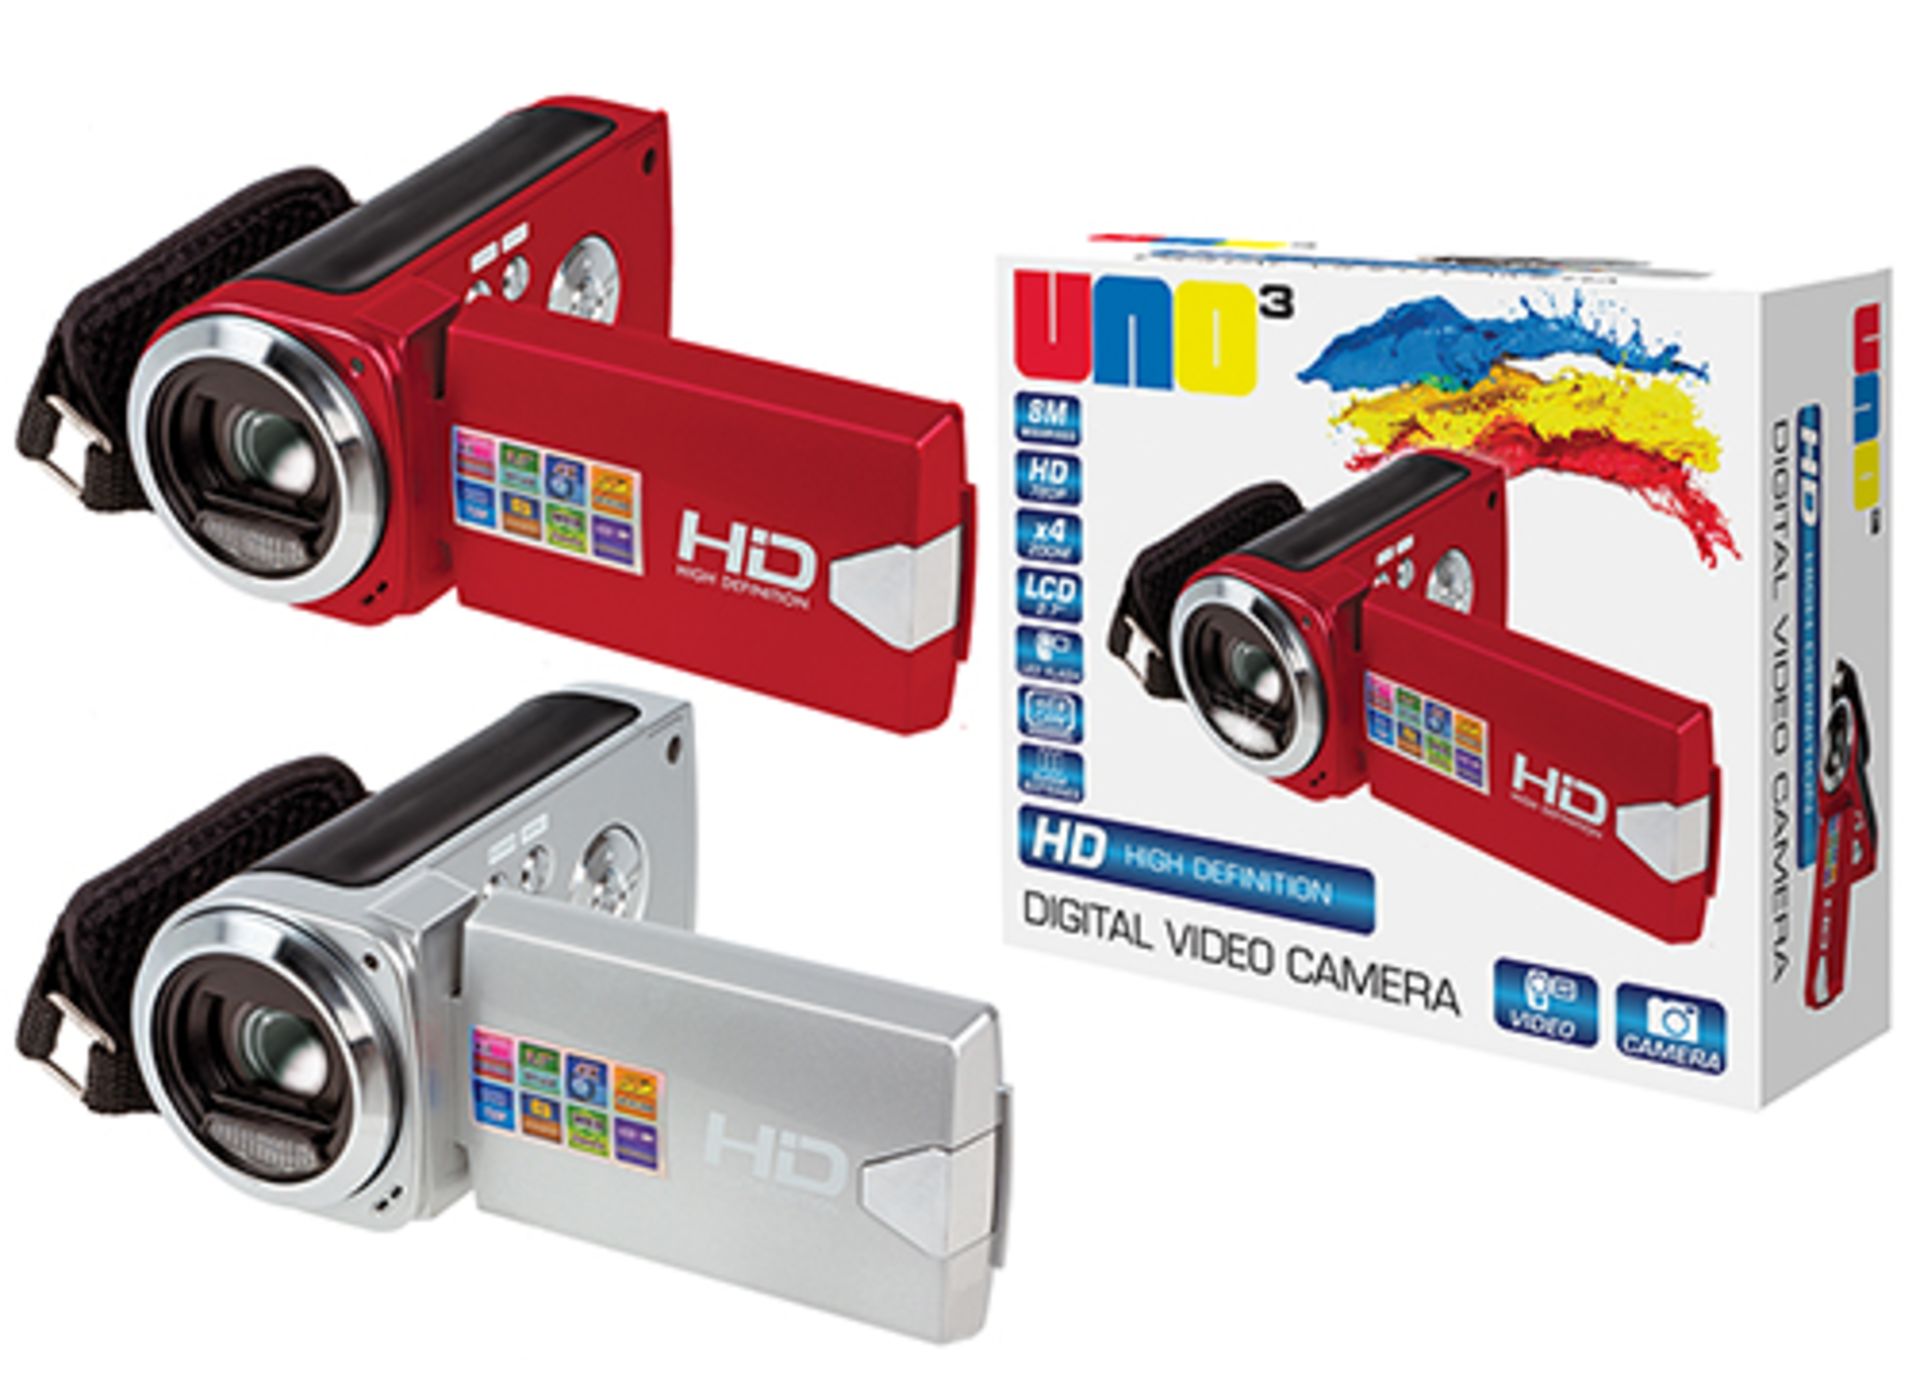 V Brand New HD Digital Video Camera 2.7 Inches TFT LCD X 2 YOUR BID PRICE TO BE MULTIPLIED BY TWO